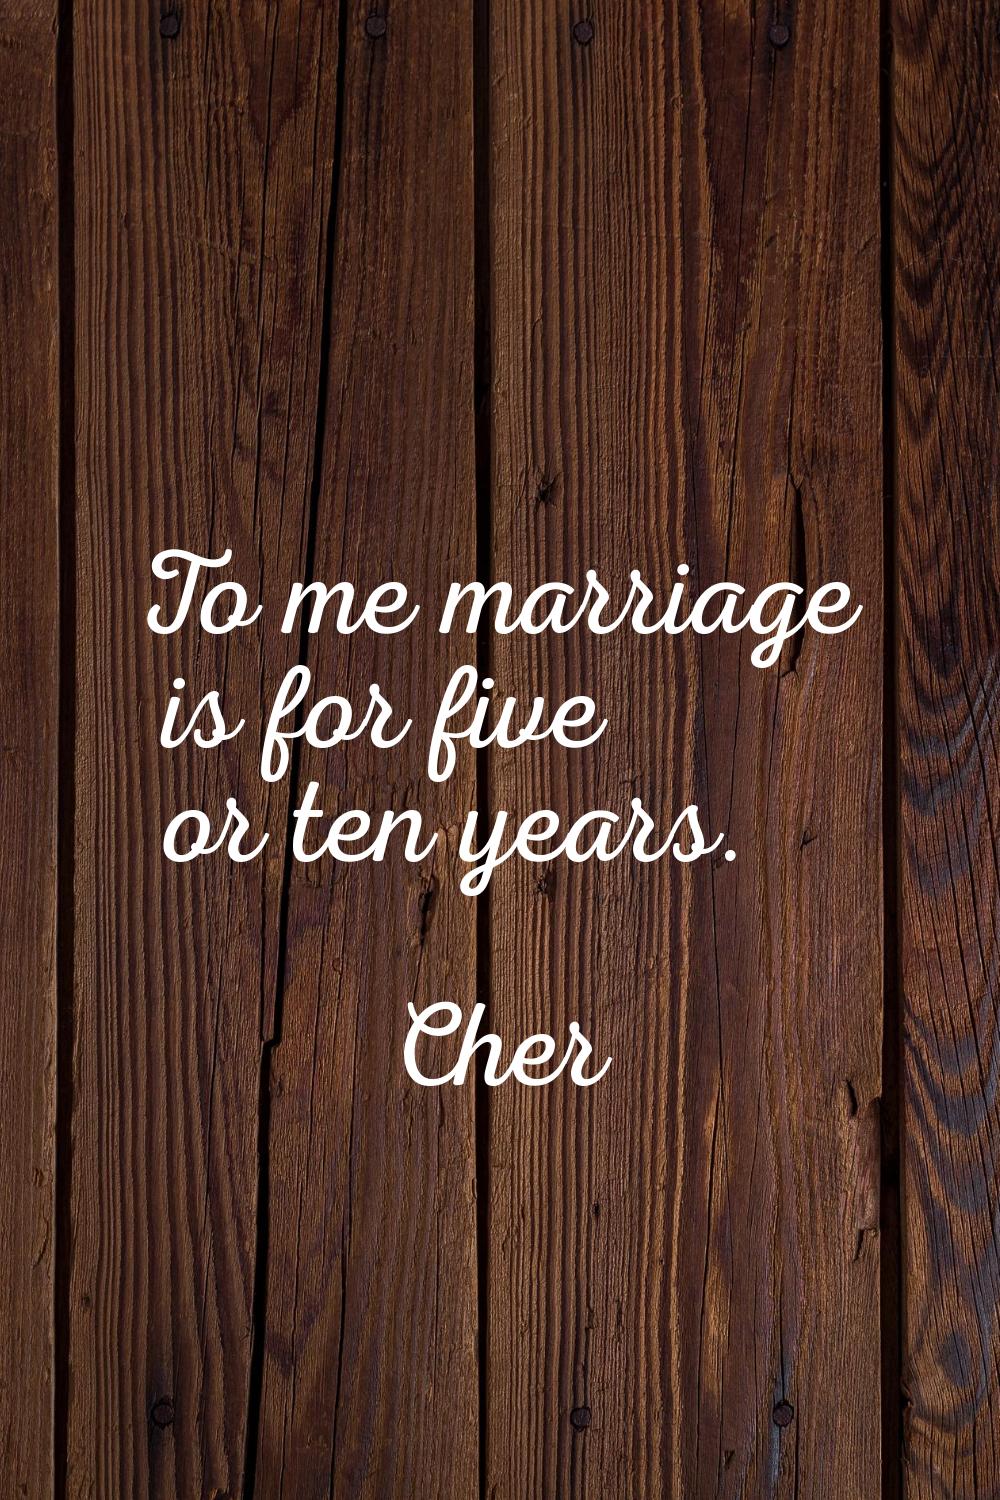 To me marriage is for five or ten years.